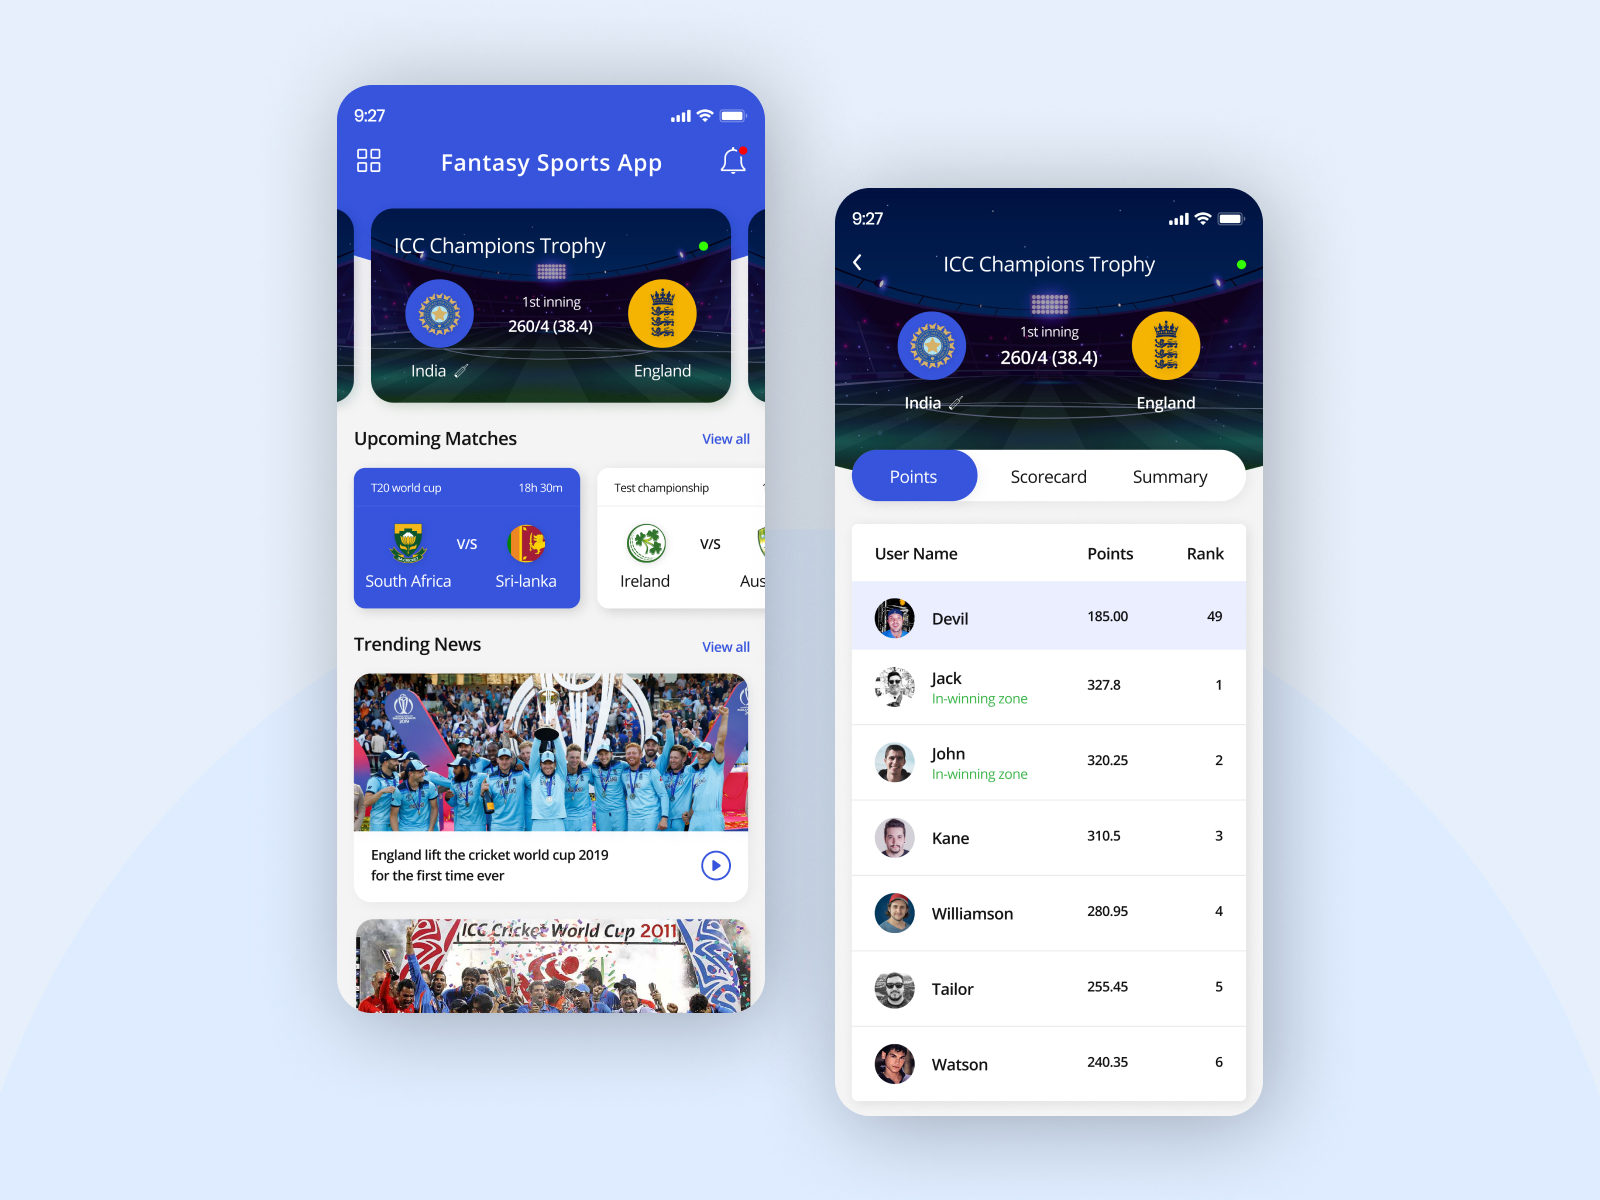 Fifa Women's World Cup Mobile App Concept by MQoS UI/UX for MultiQoS on  Dribbble